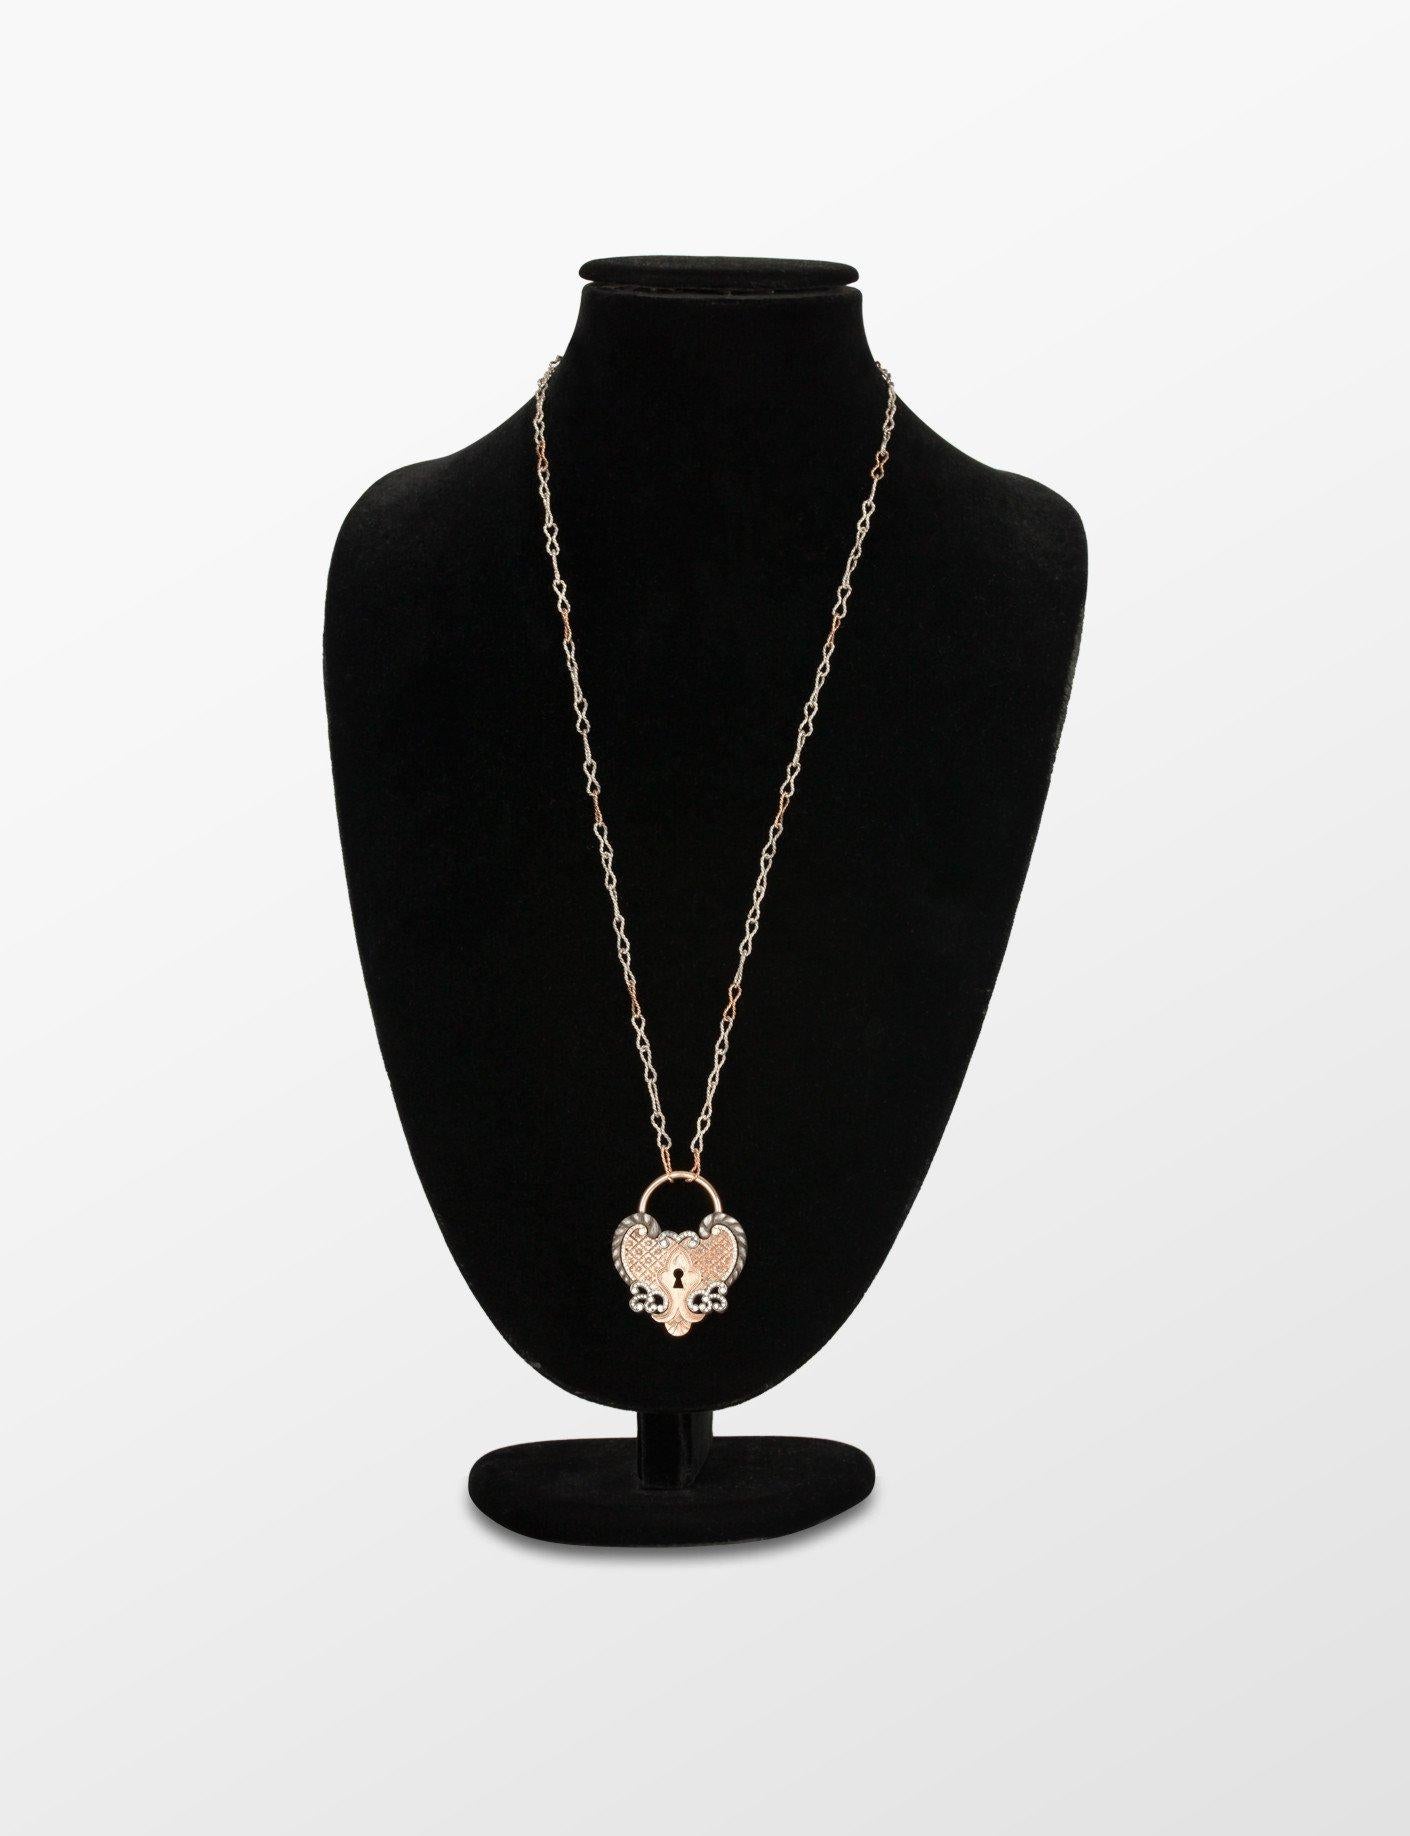 18 Karat Rose Gold Antique Padlock Necklace with 0.66 Carat White Diamonds In New Condition For Sale In Miami, FL